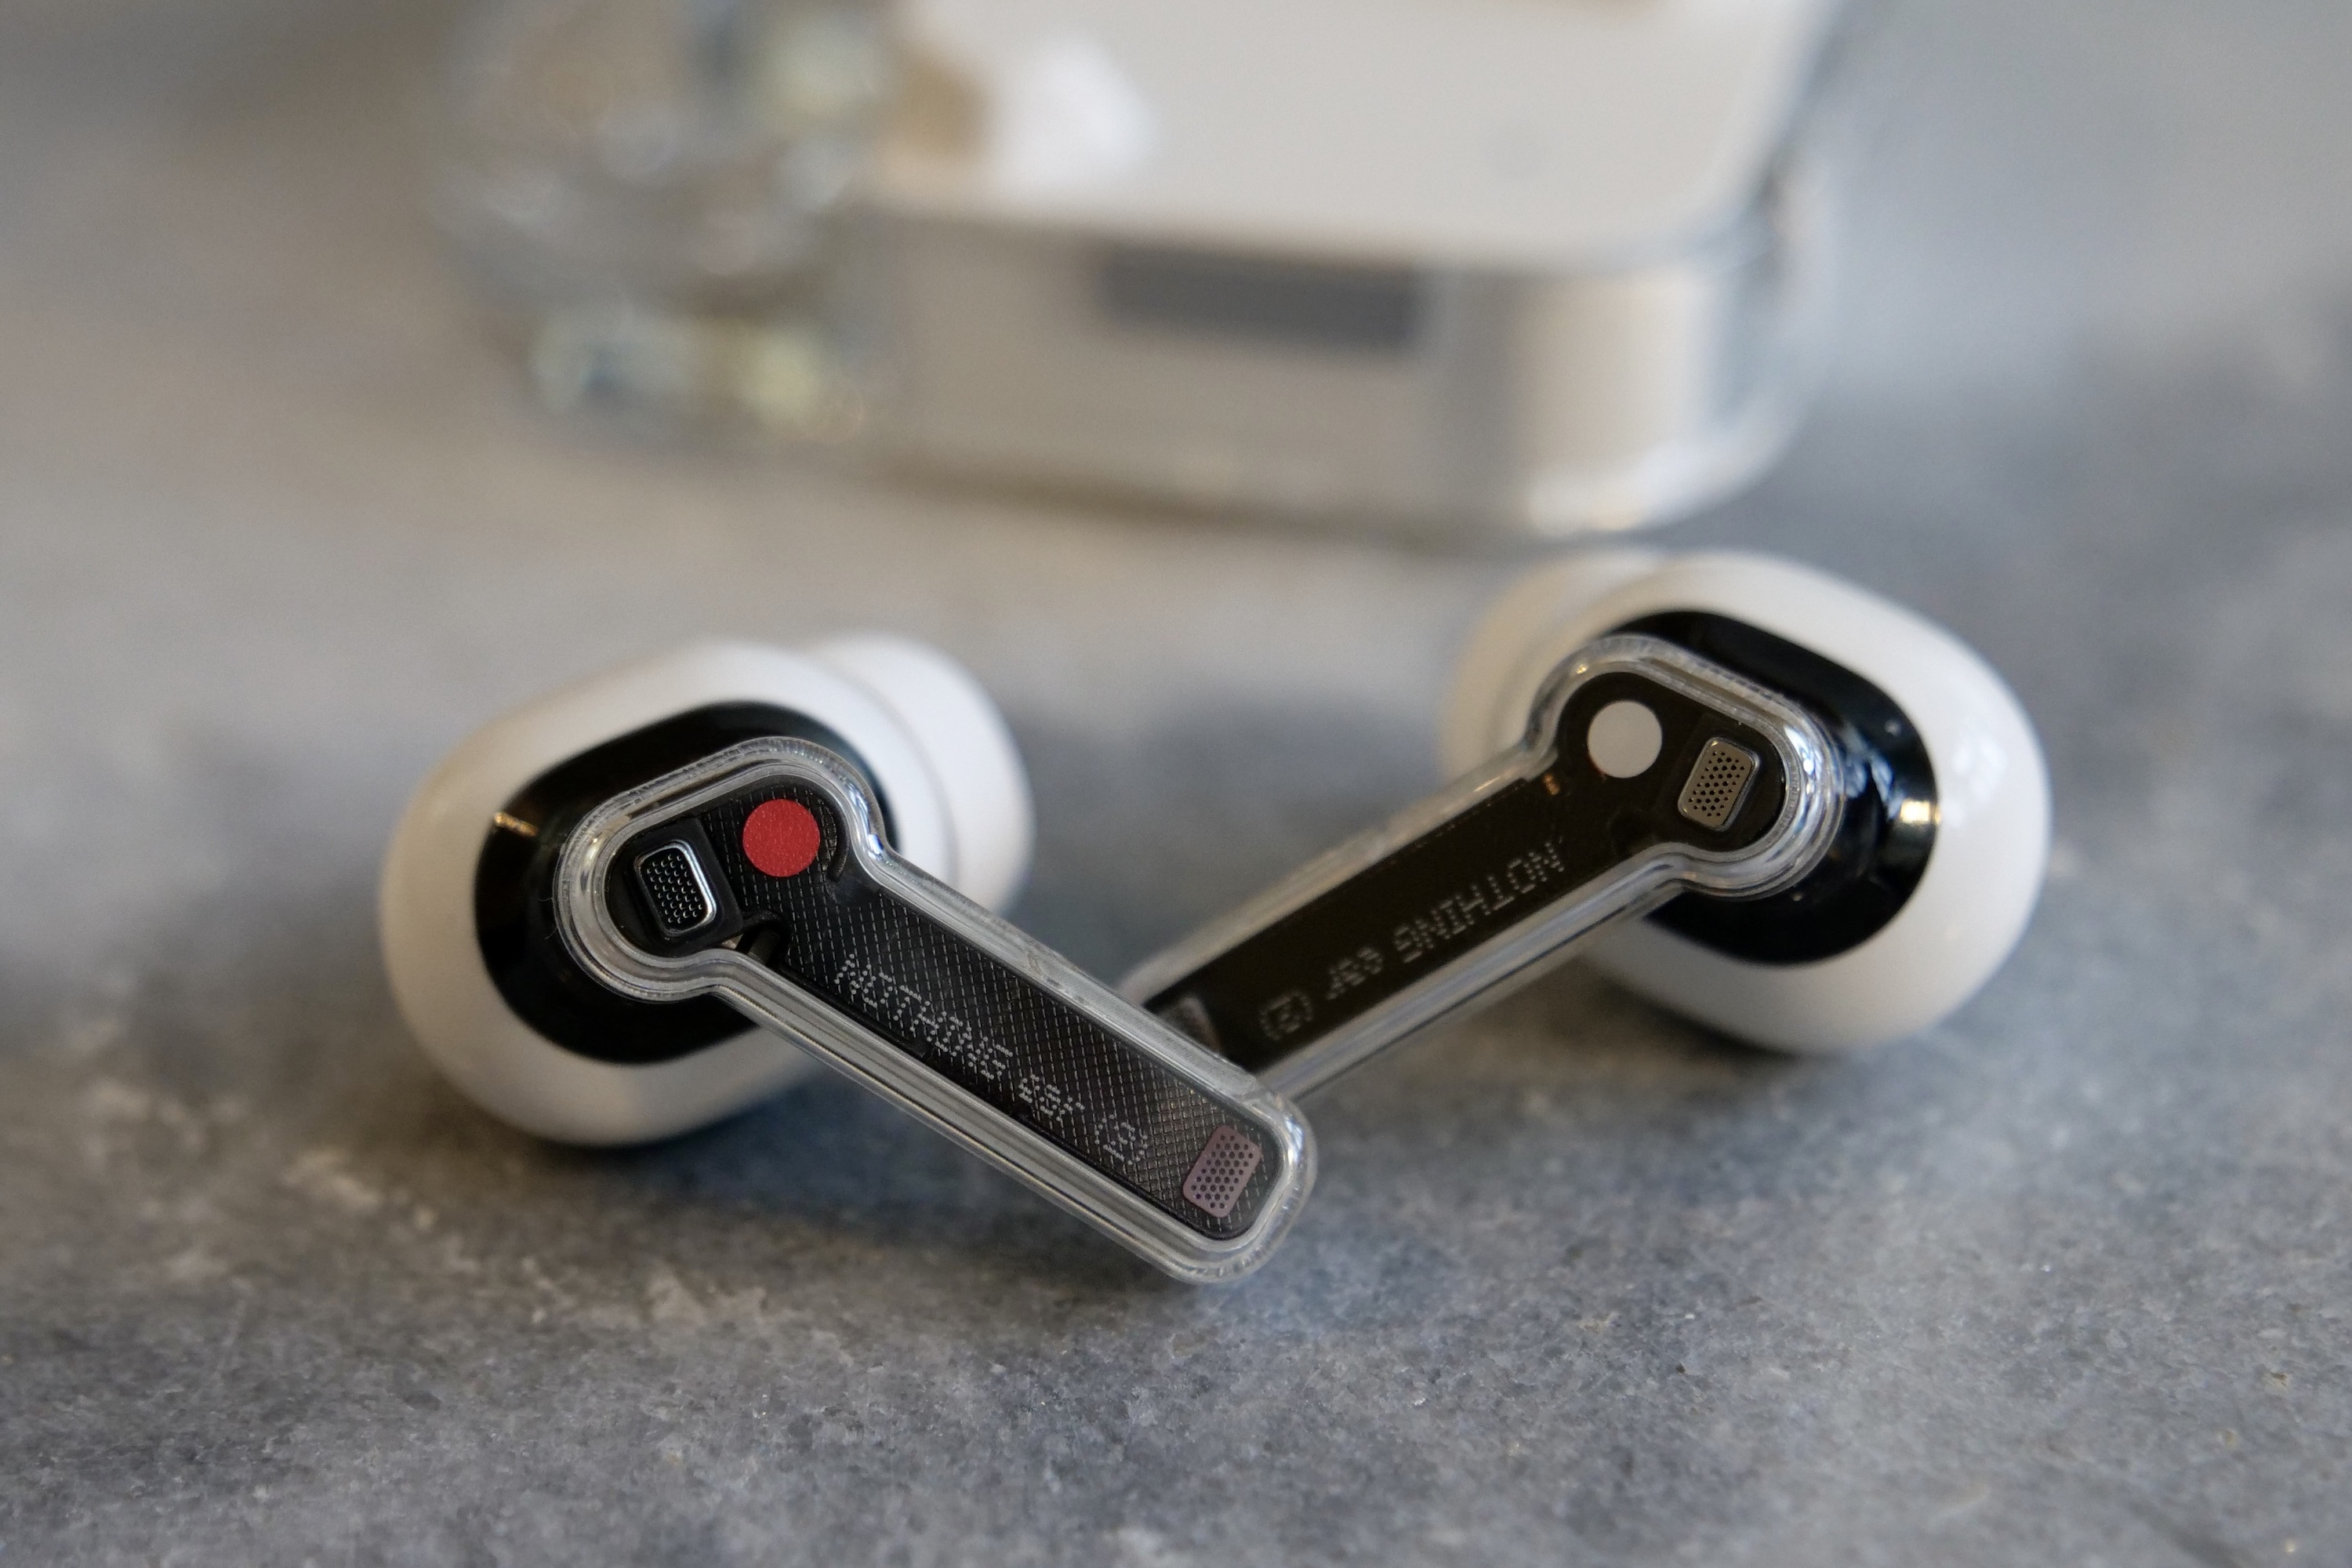 Nothing Ear 2 Buds Have Great Sound and Noise Canceling for $149